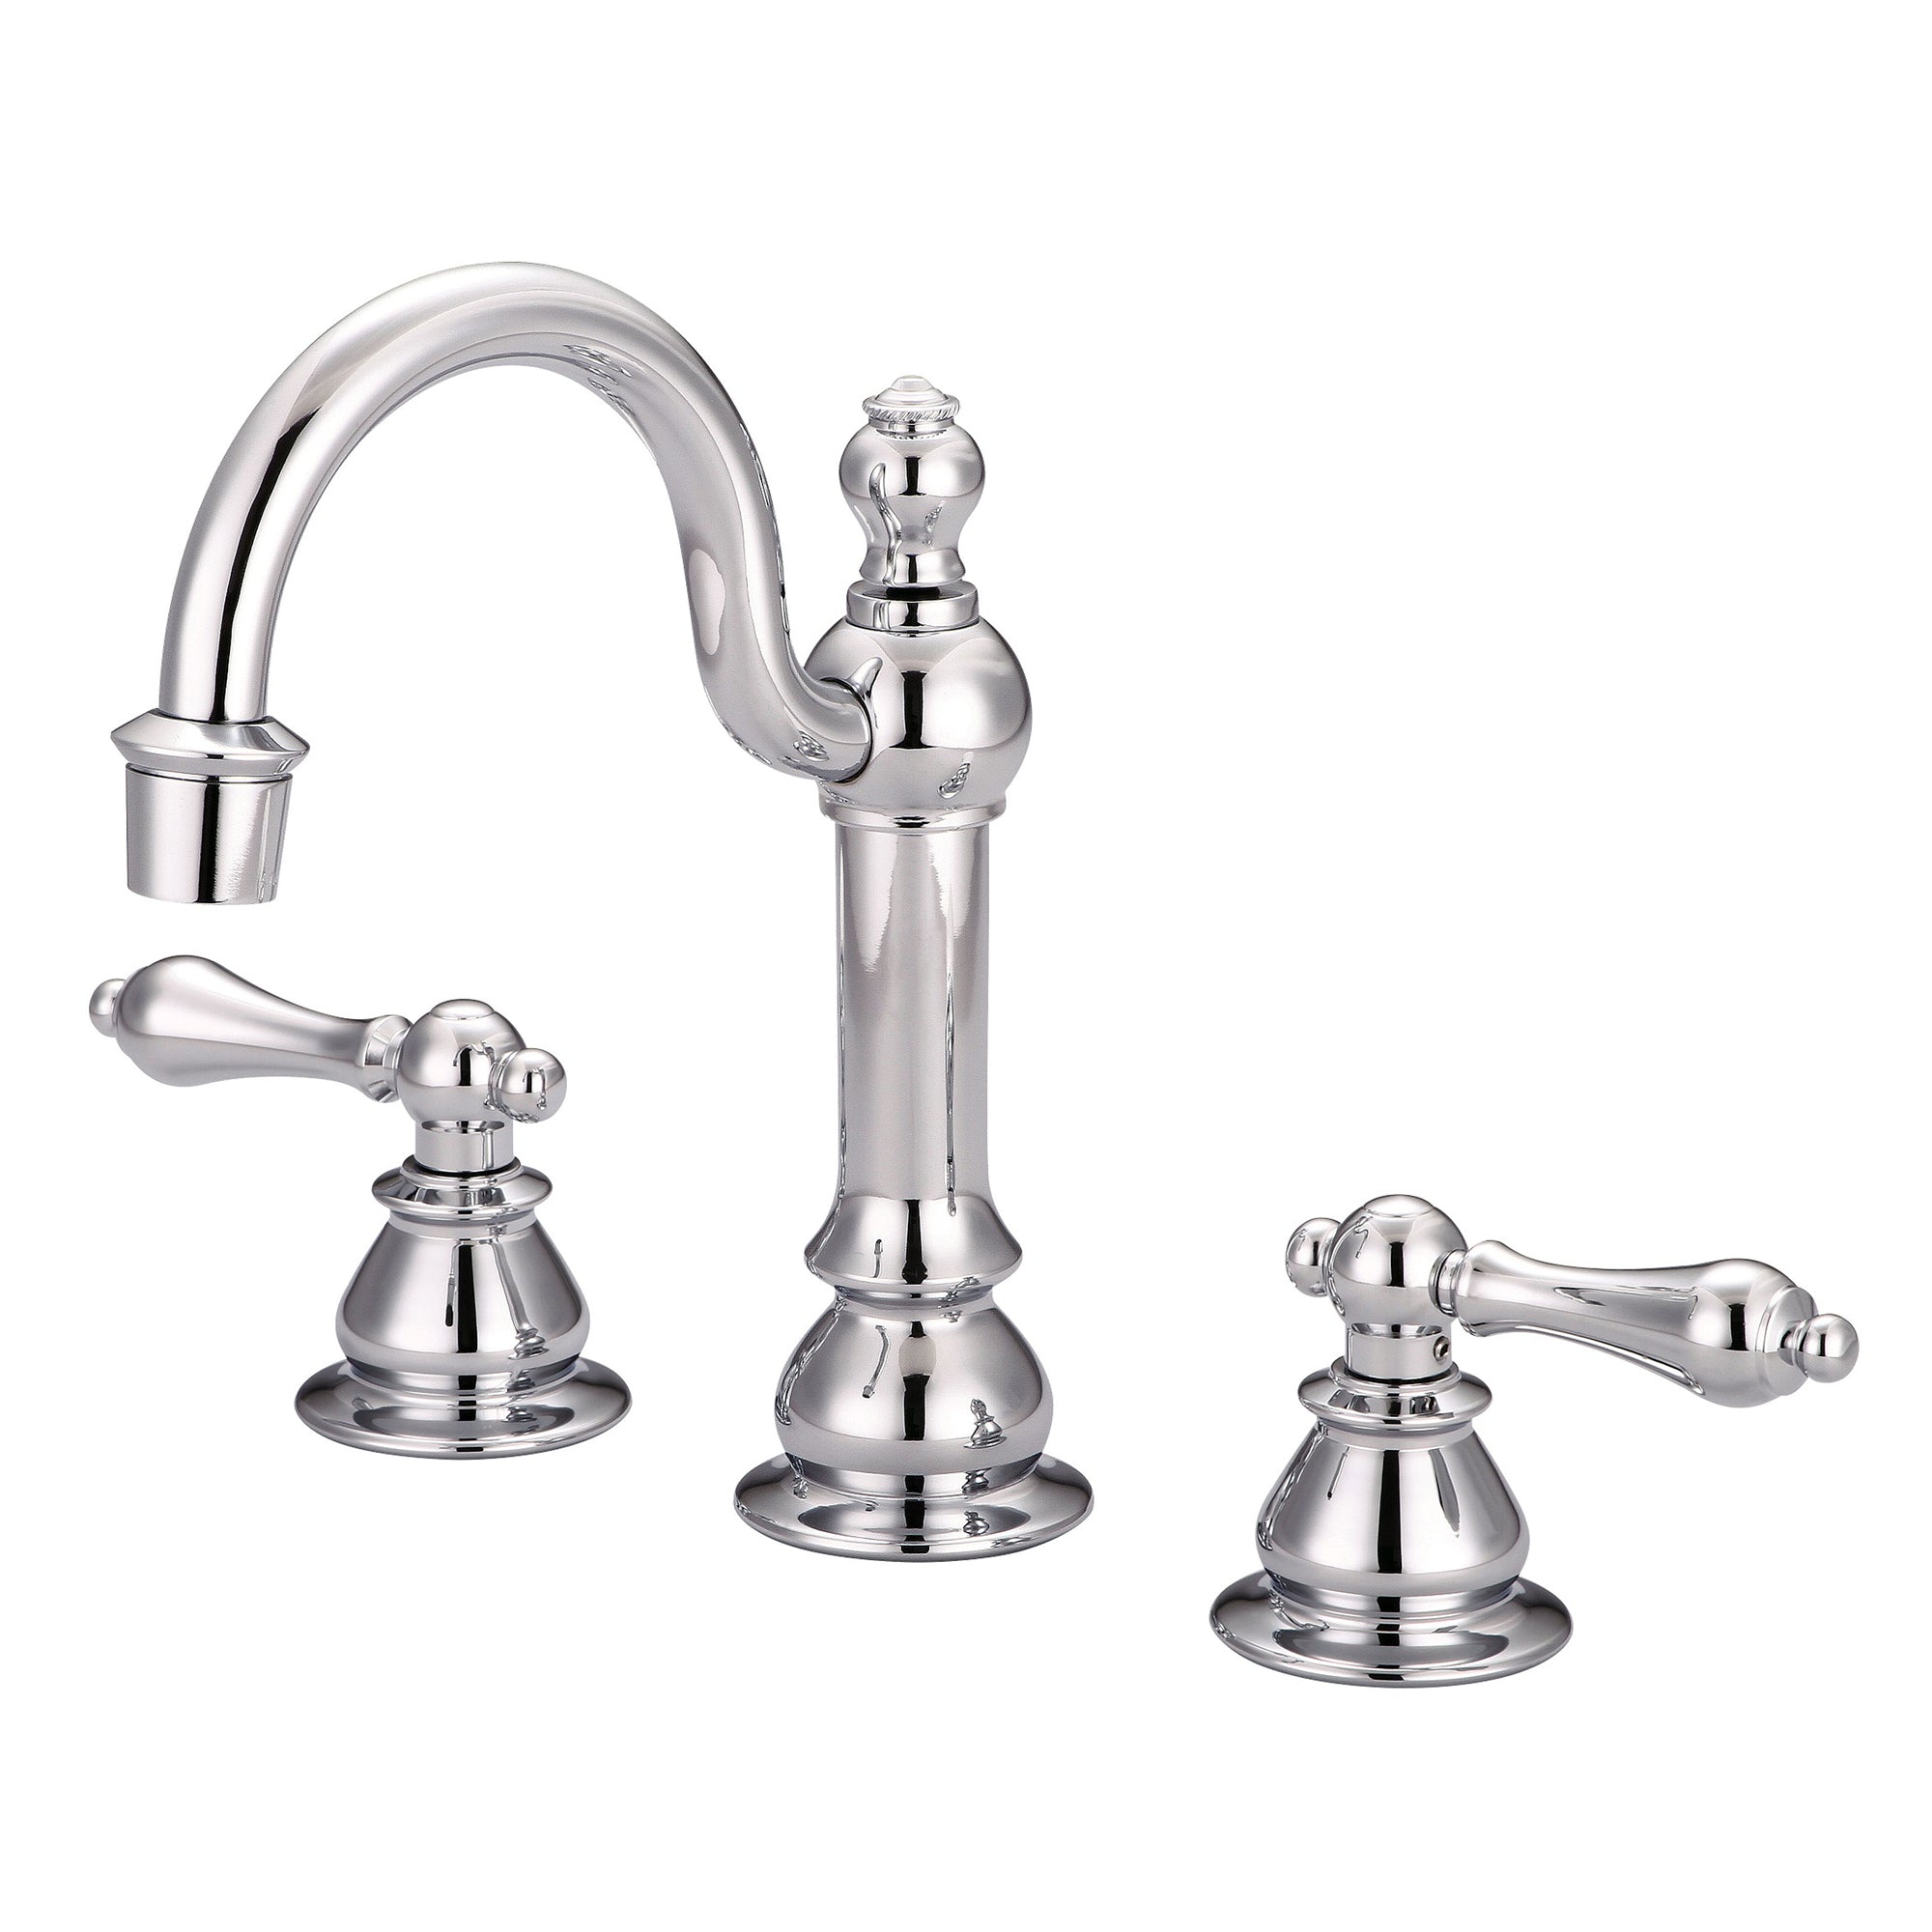 Water Creation | American 20th Century Classic Widespread Lavatory F2-0012 Faucets With Pop-Up Drain in Chrome Finish With Metal Lever Handles | F2-0012-01-AL